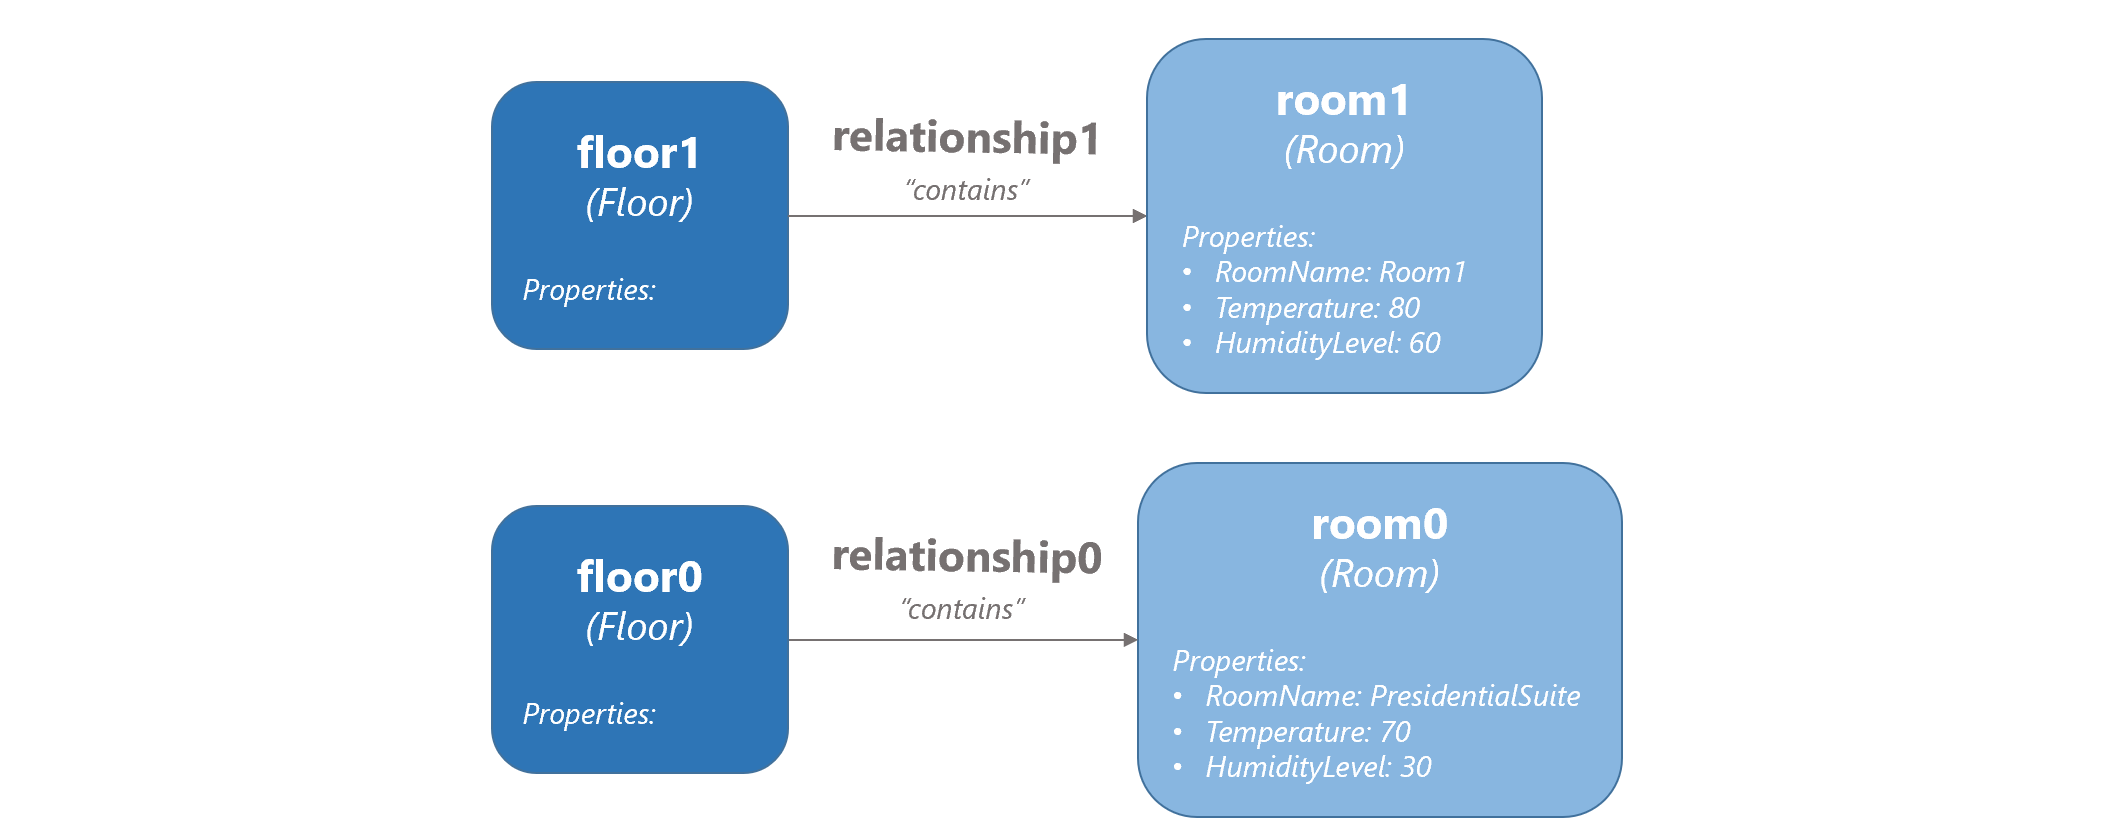 A diagram showing a conceptual graph. floor0 is connected via relationship0 to room0, and floor1 is connected via relationship1 to room1.